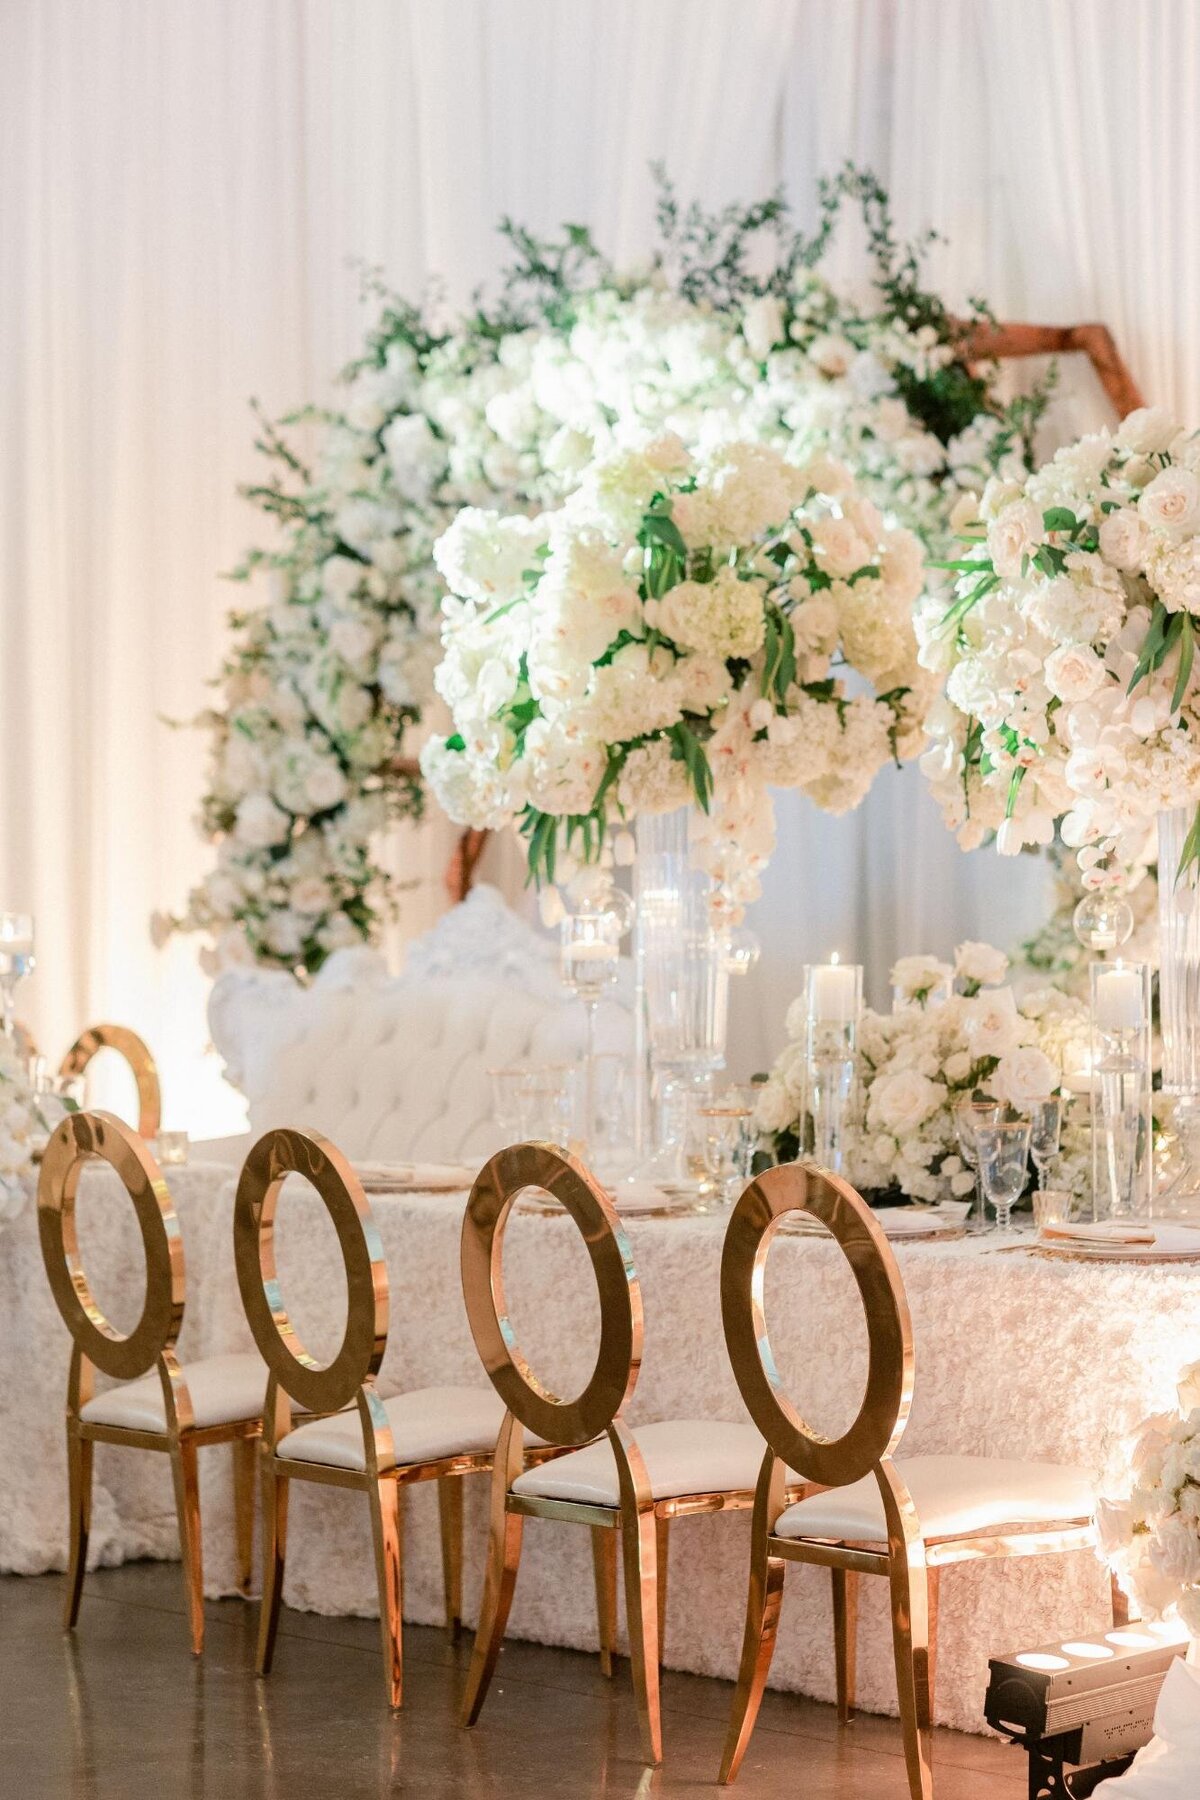 Elegant wedding reception setup with white floral arrangements and gold-accented chairs.